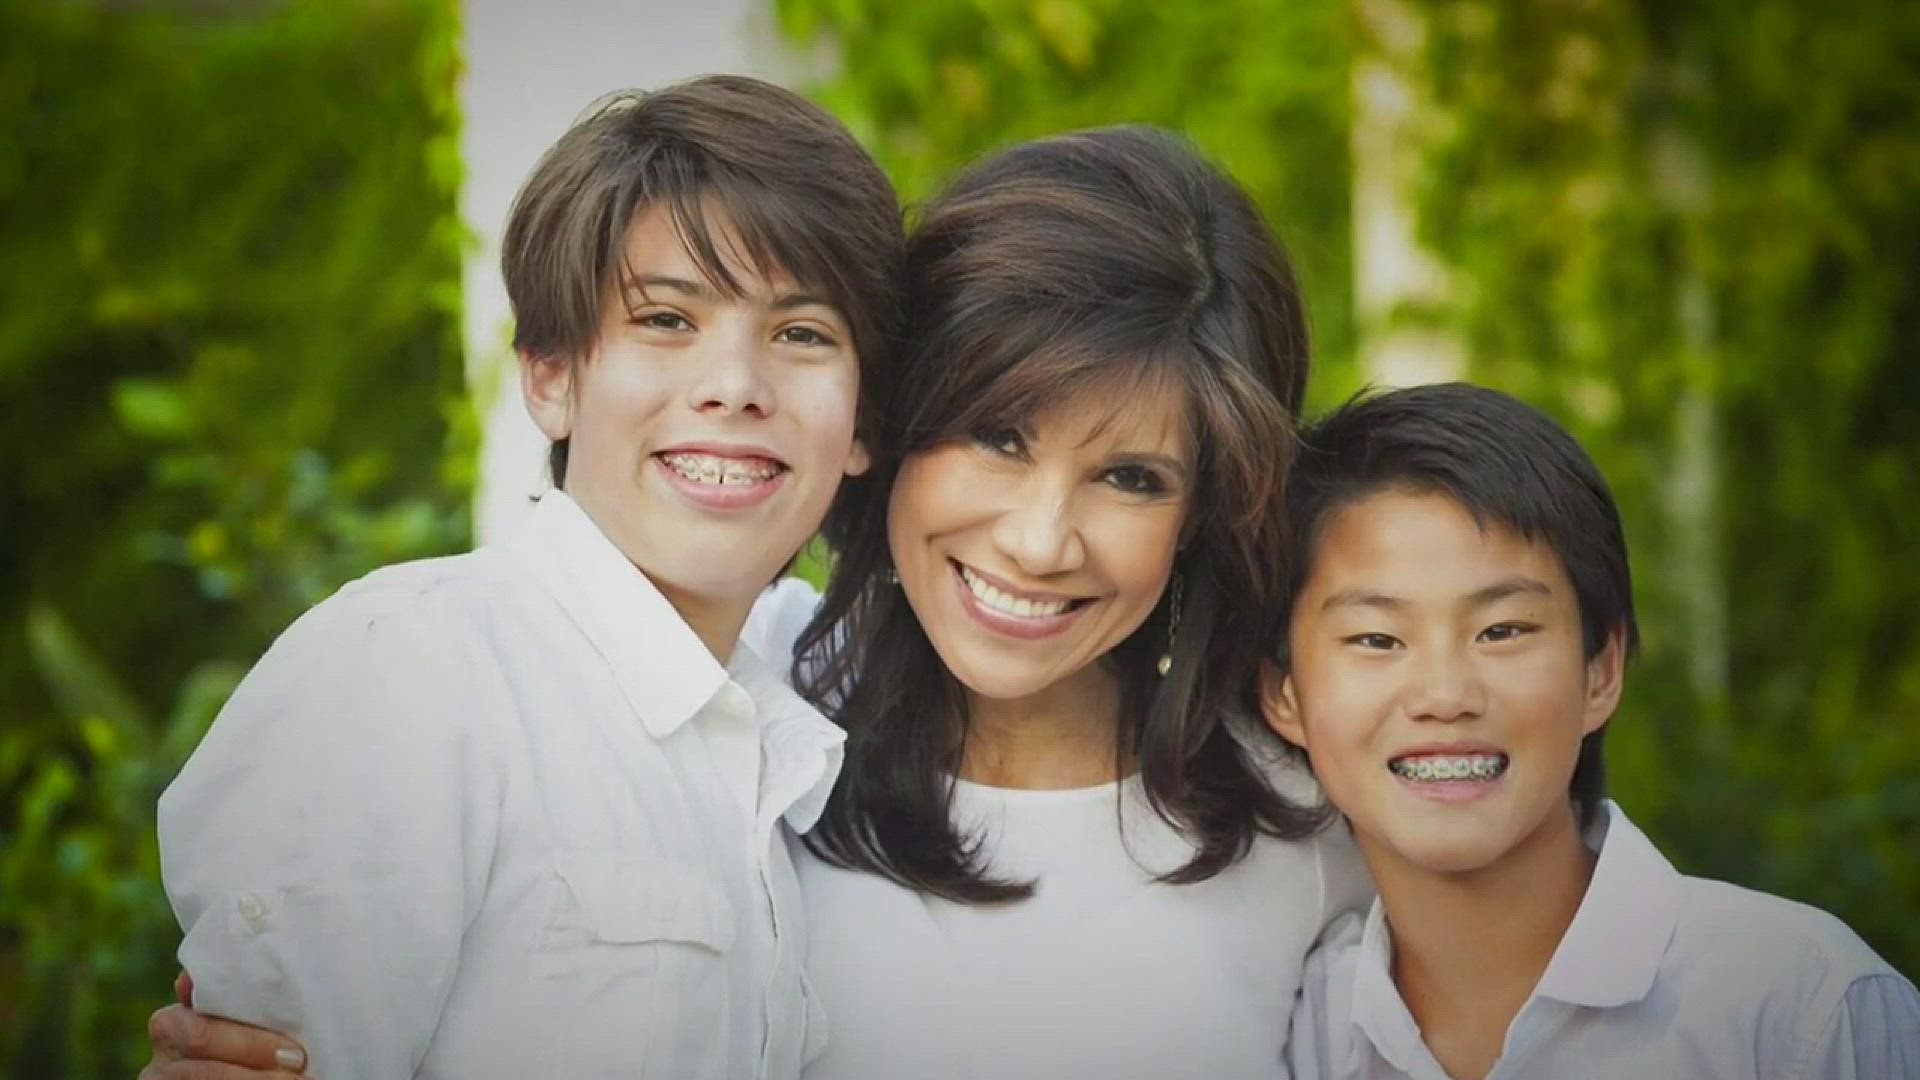 Former 12 News anchor Lin Sue Cooney master balancing family and career.